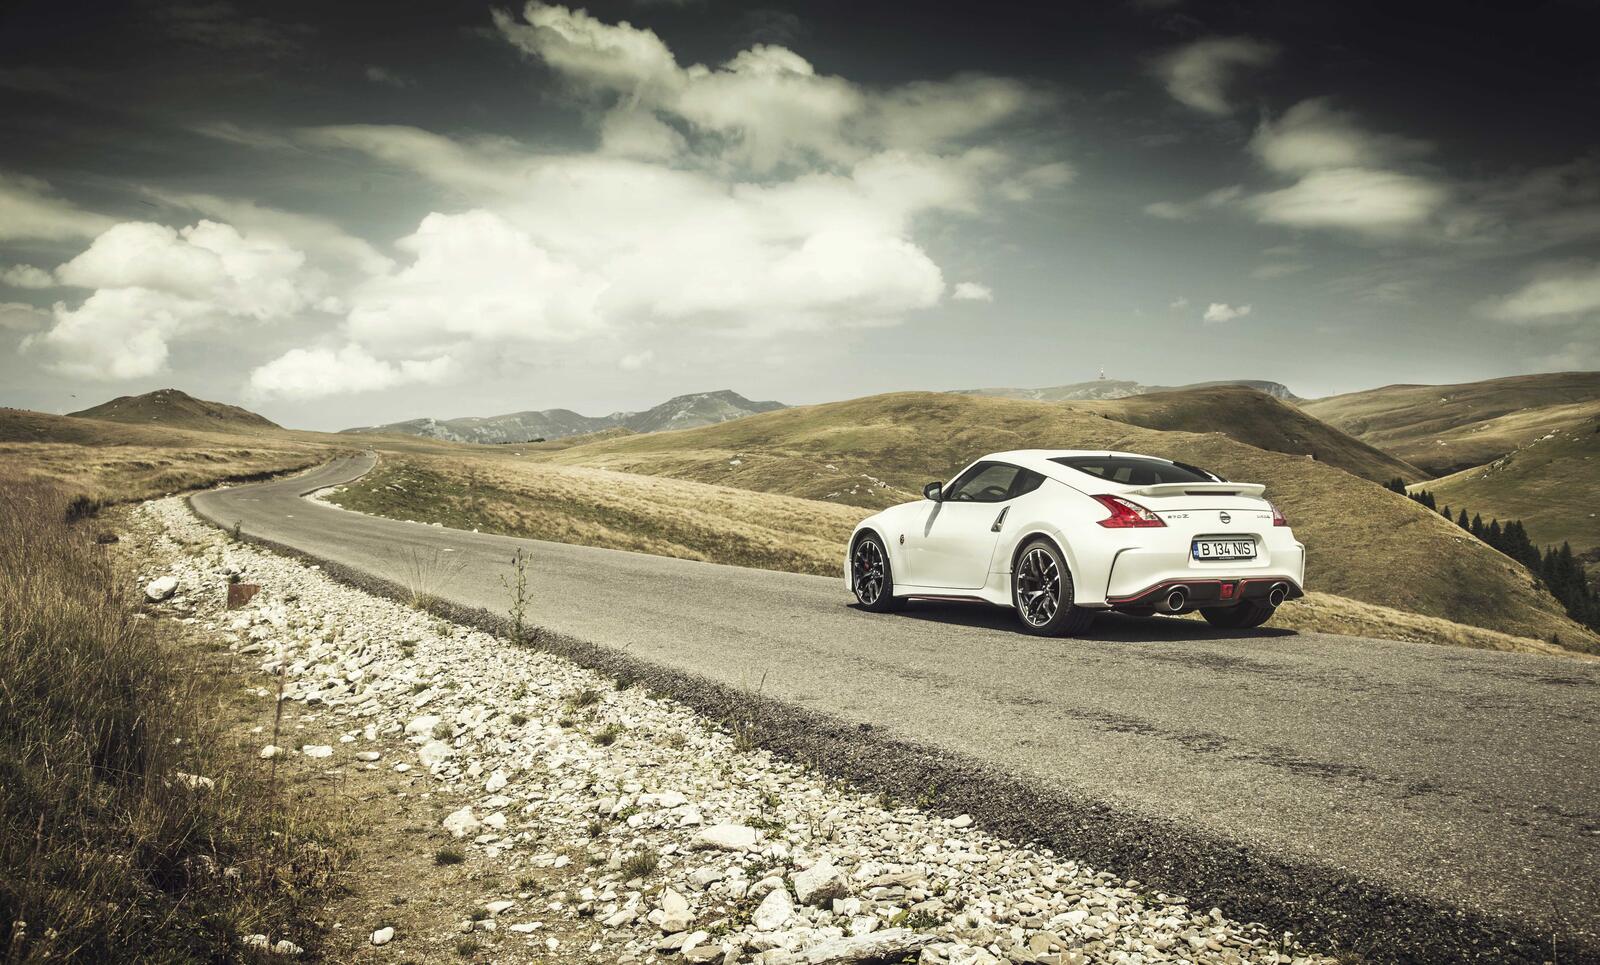 Free photo A white Nissan 370z on a country road